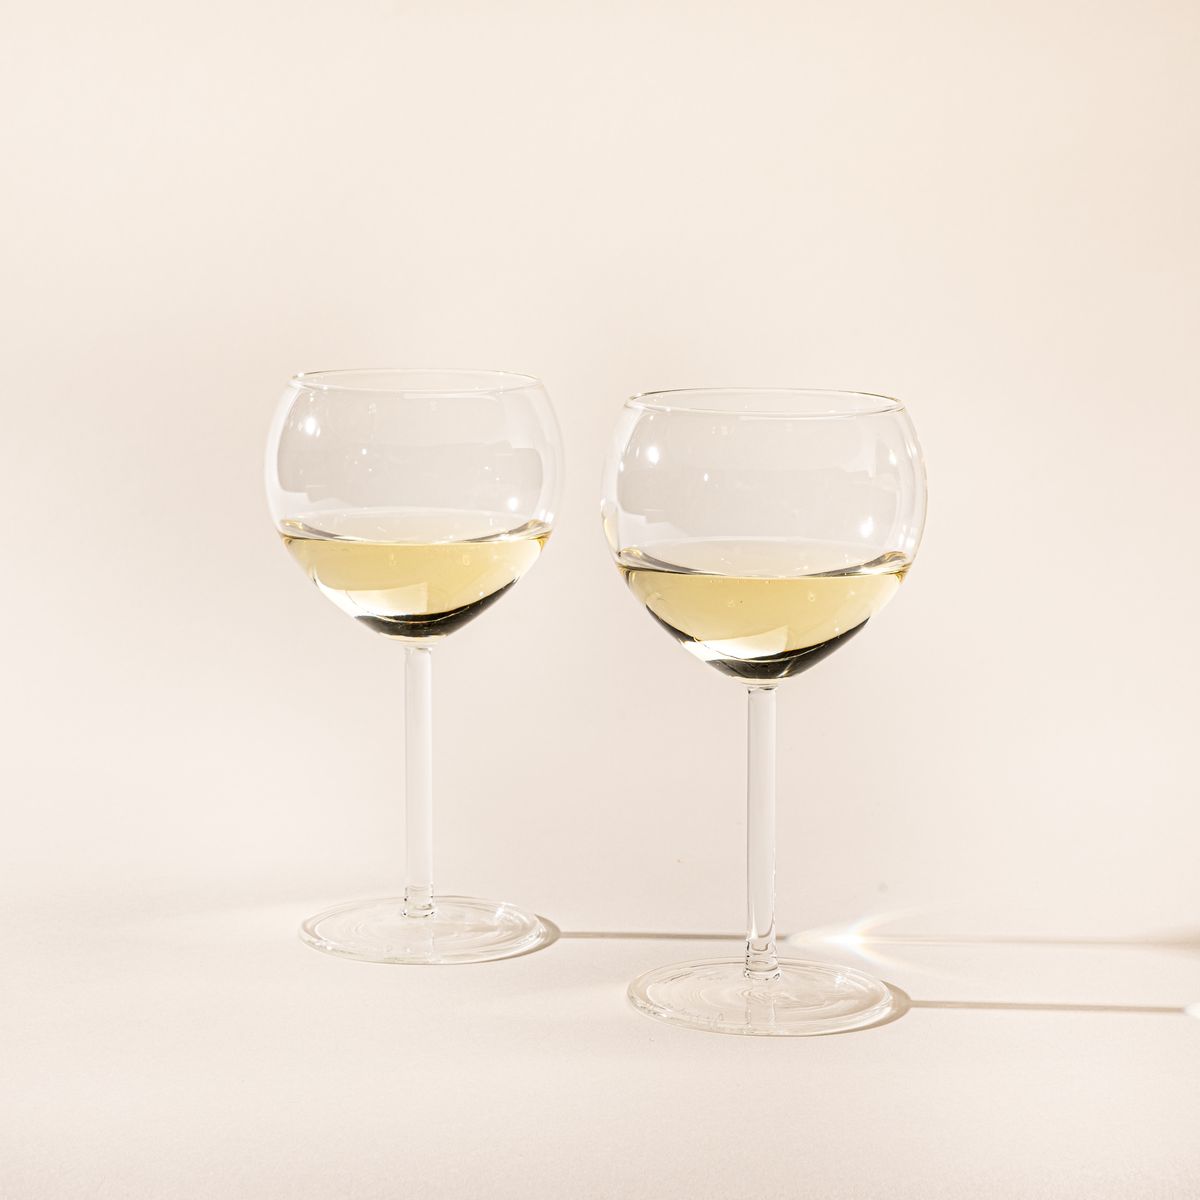 Two simple round clear wine glasses filled with white wine